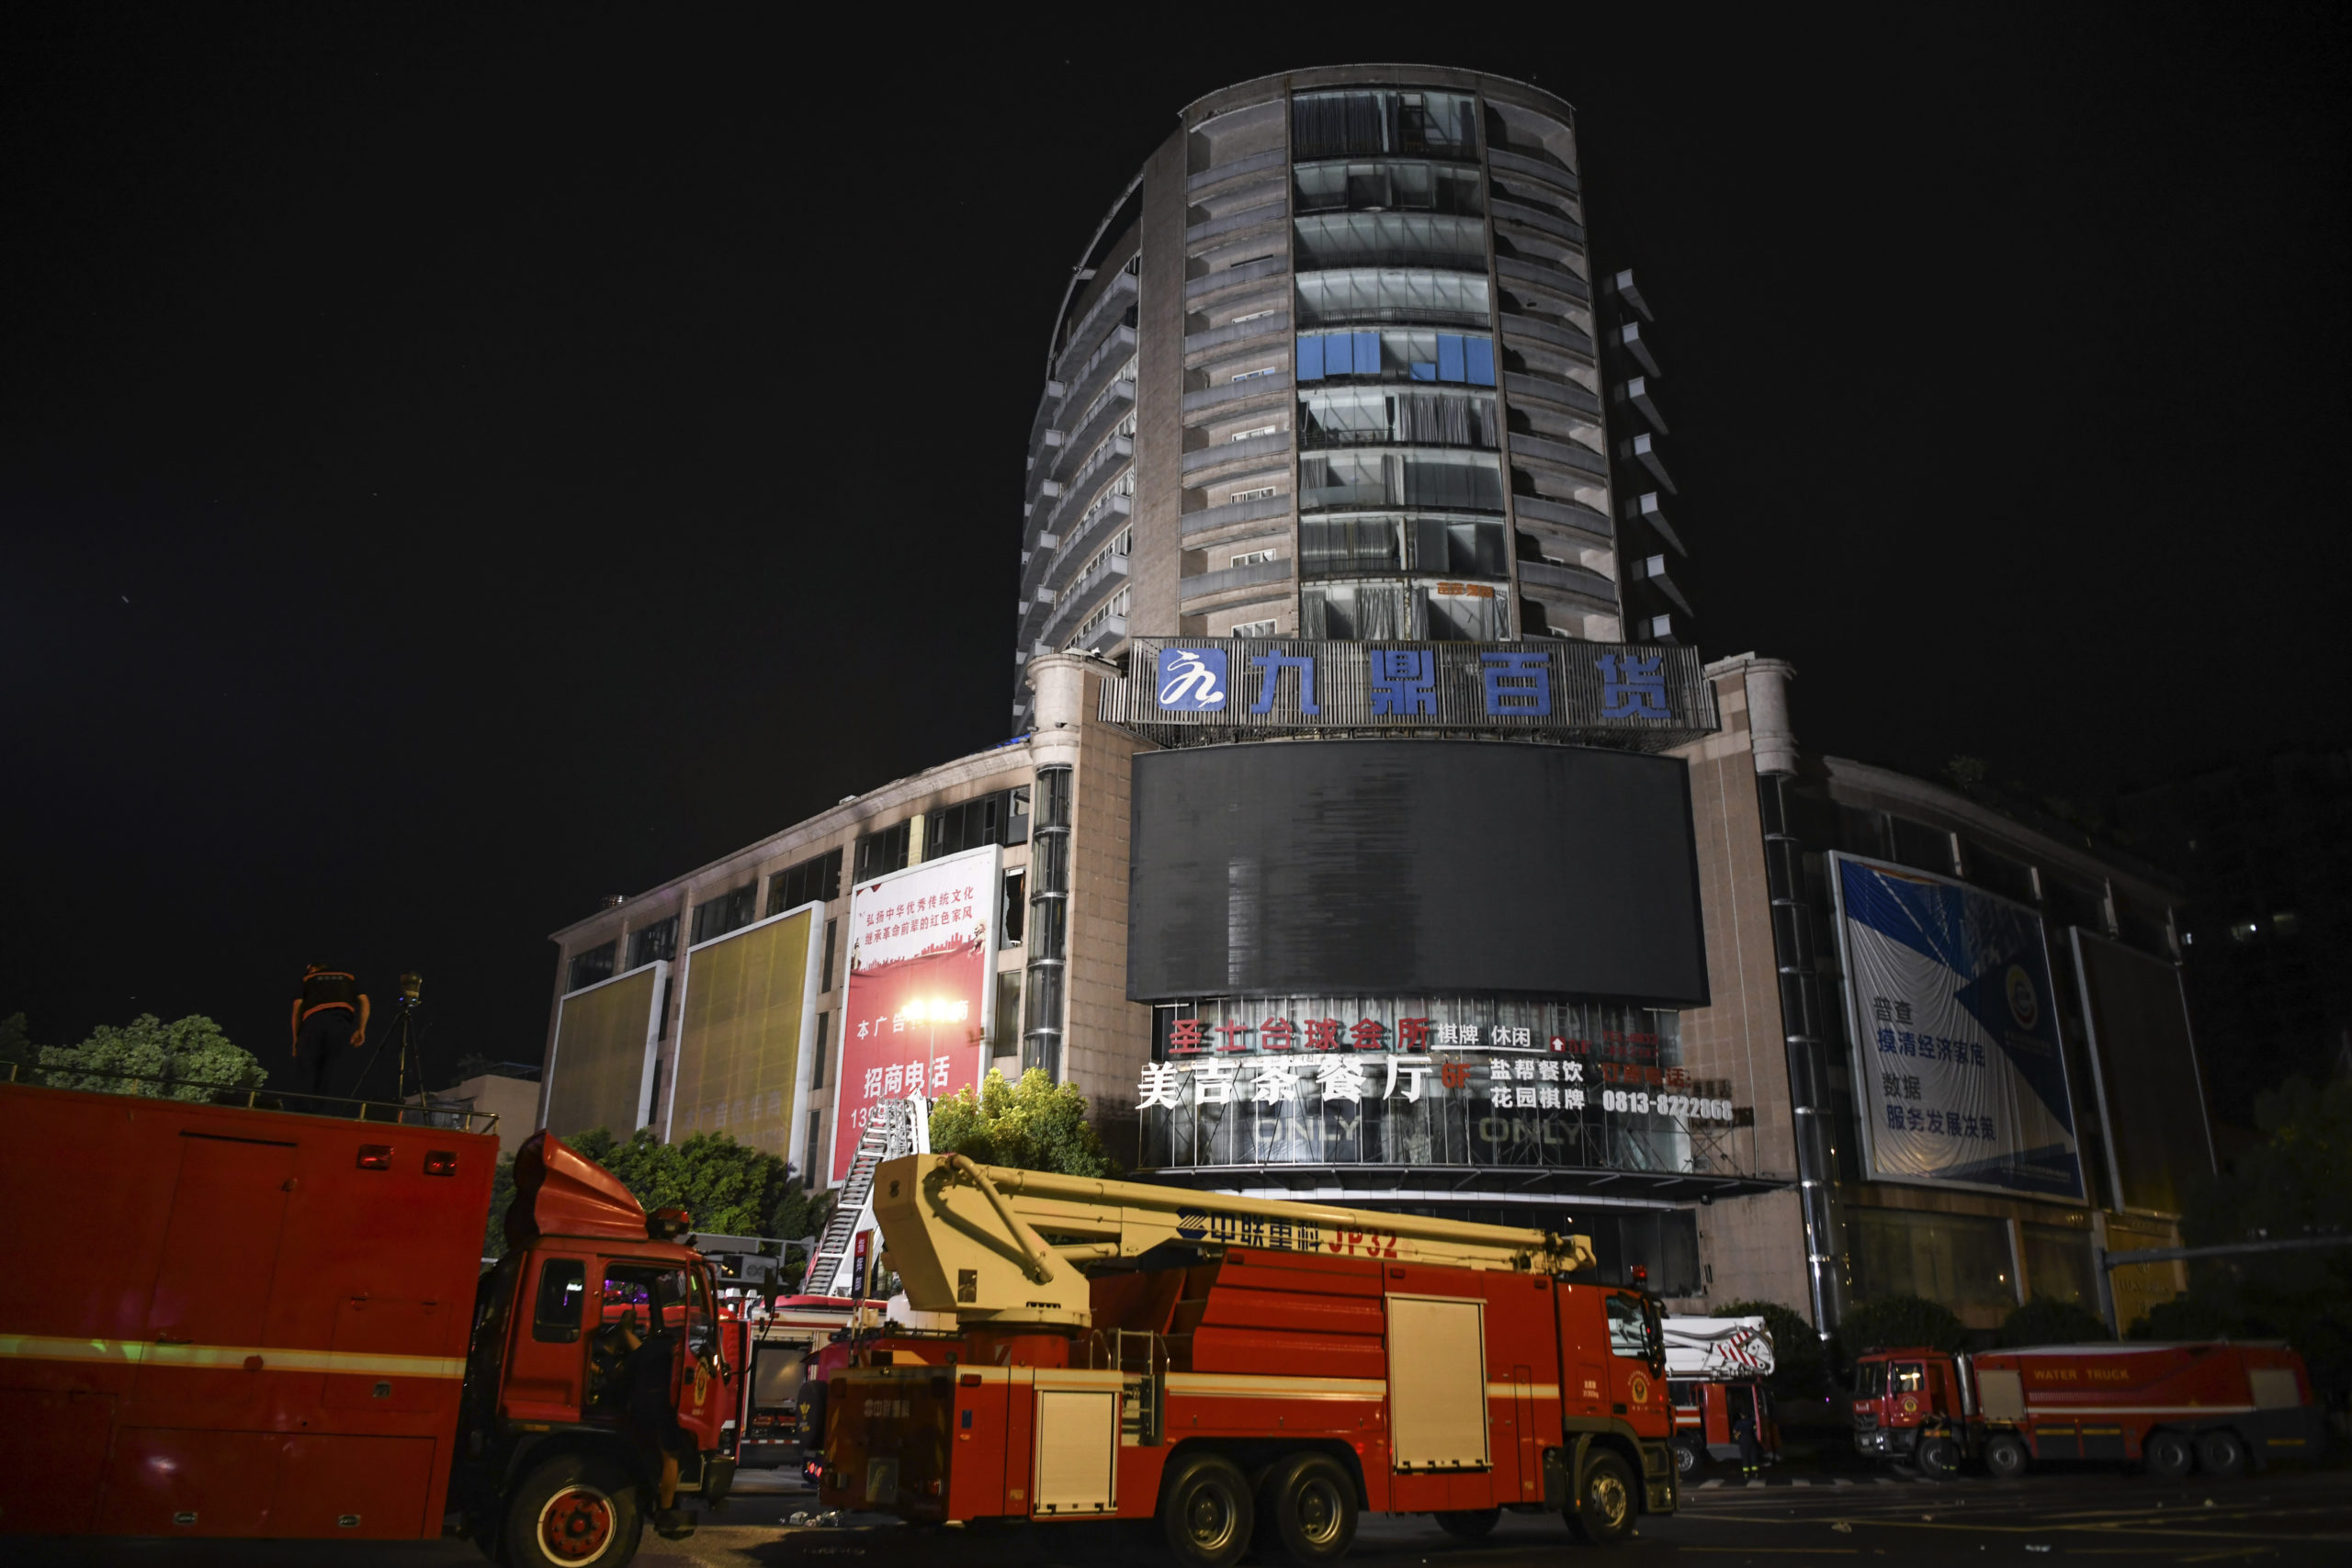 Fire engines are parked near a department store in Zigong City, southwest China's Sichuan Province on Thursday, following Wednesday's deadly fire at the department store.